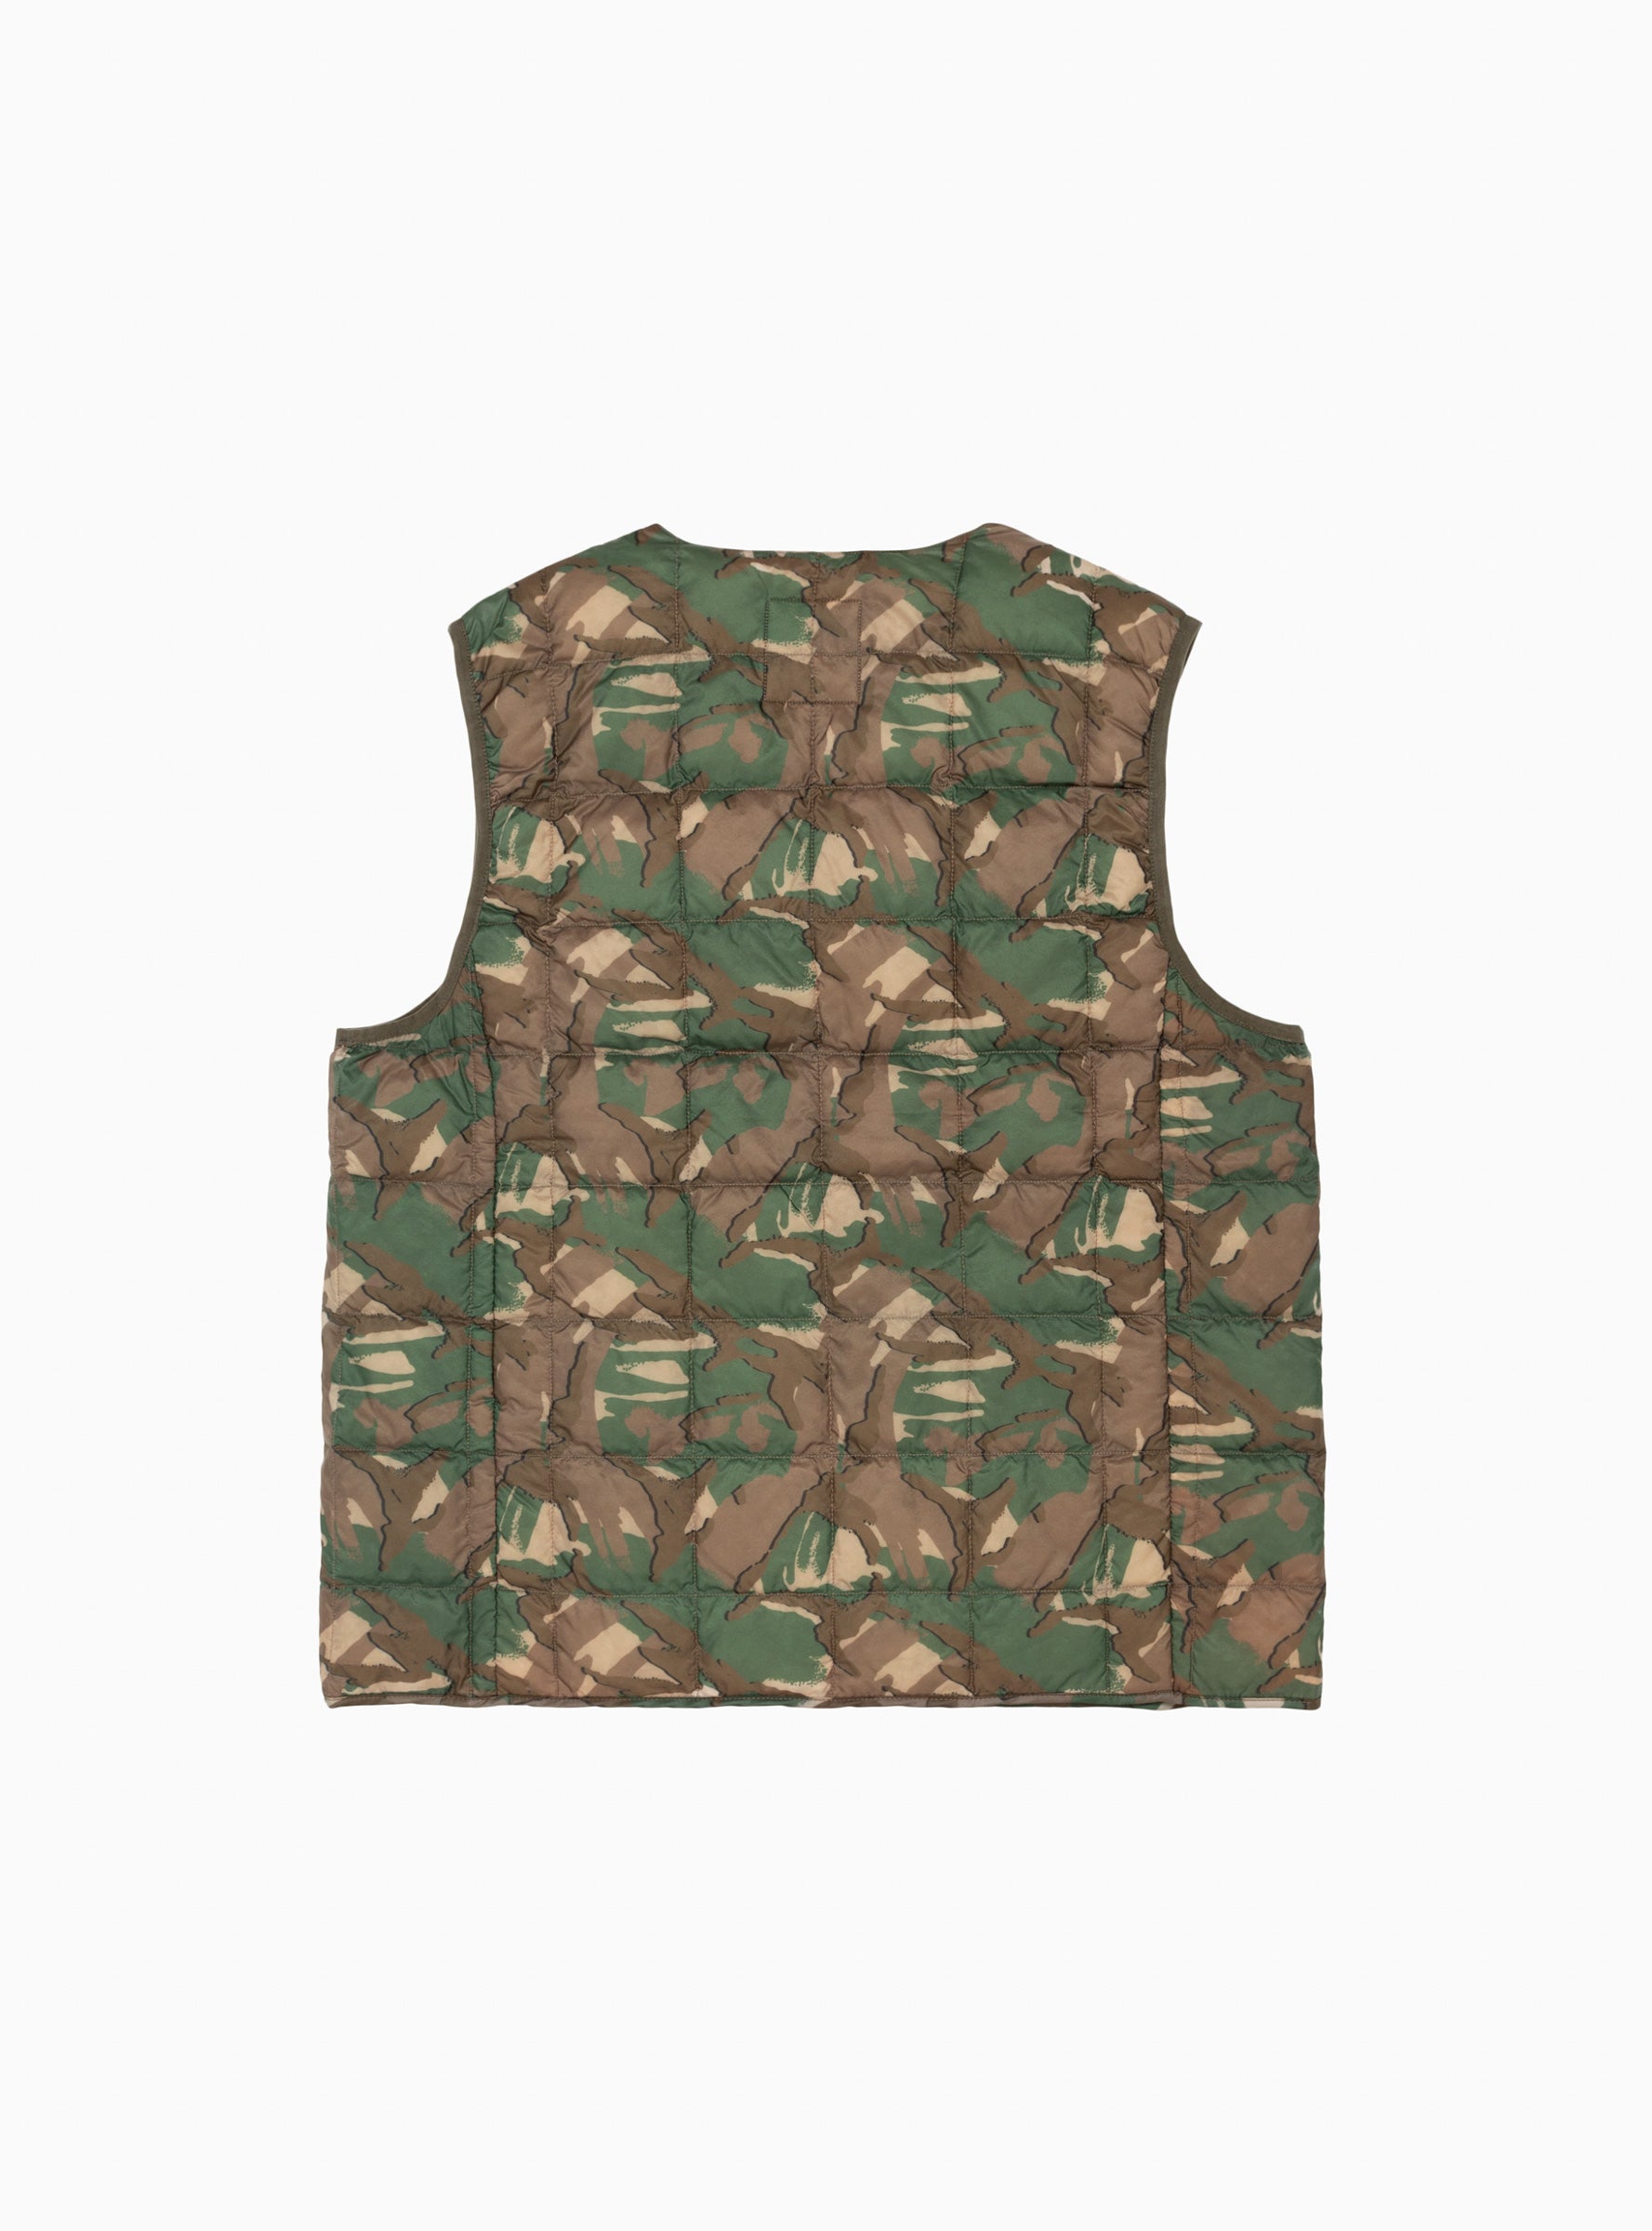 x TAION Inner Down Vest Green Camo by Gramicci Couverture  The Garbstore